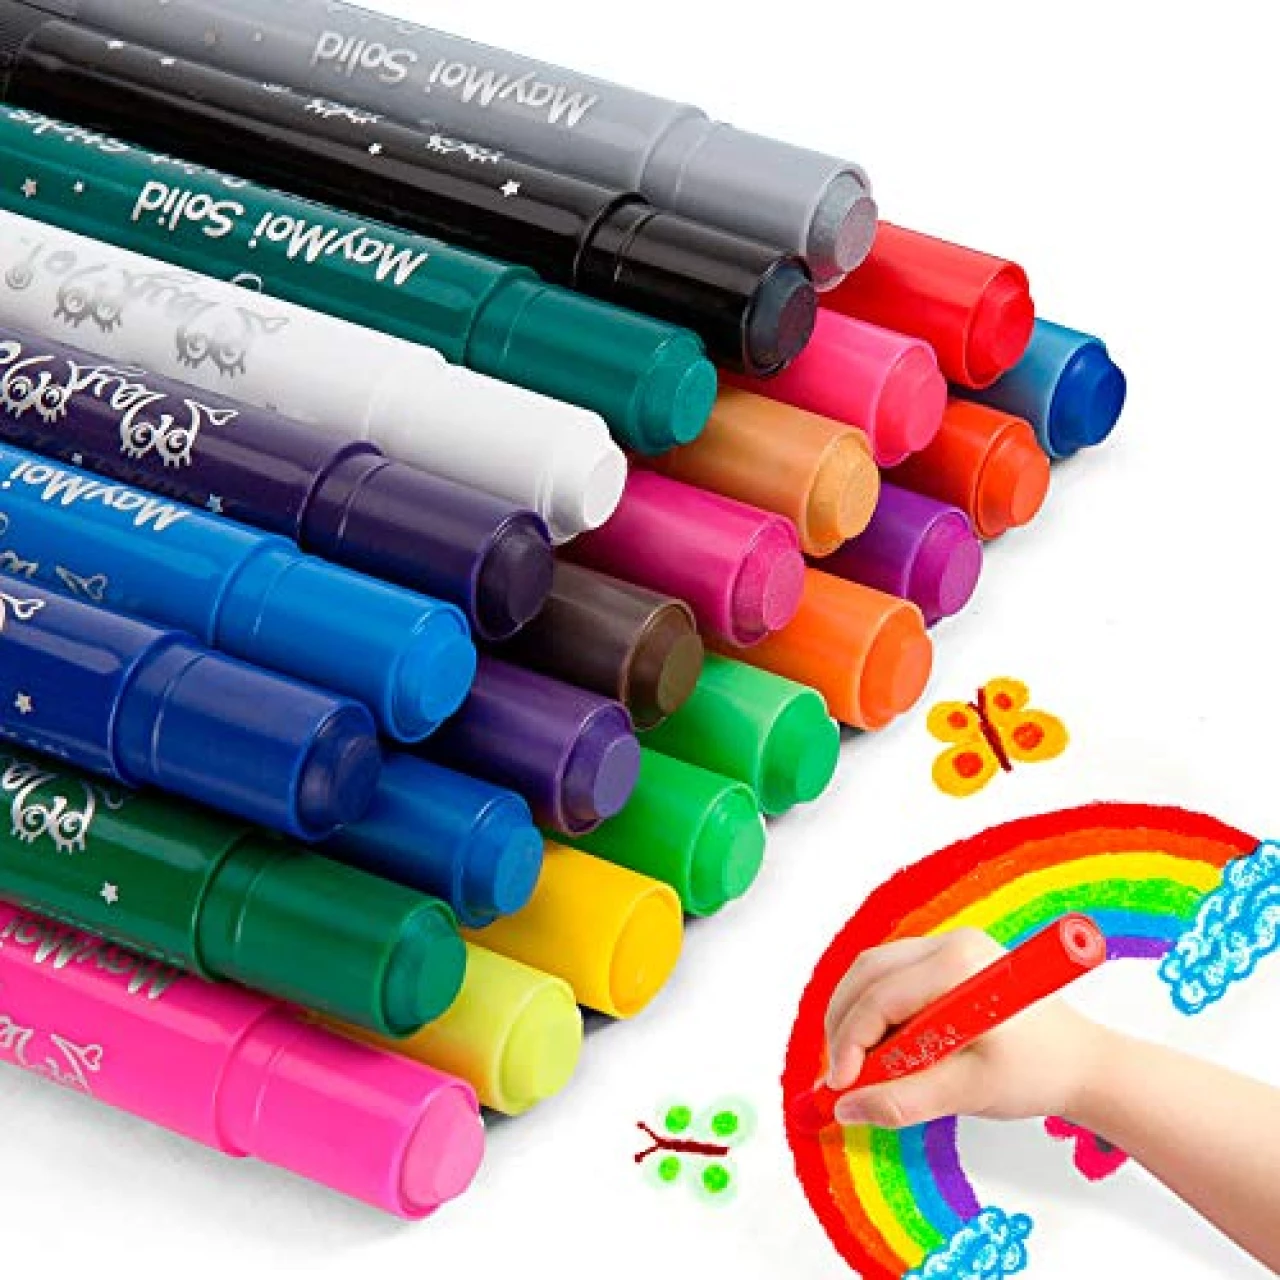 MayMoi Washable Tempera Paint Sticks | Non-Toxic, Quick Drying &amp; No Mess Paint Sticks for Kids (24 Bright Colors, 6g)